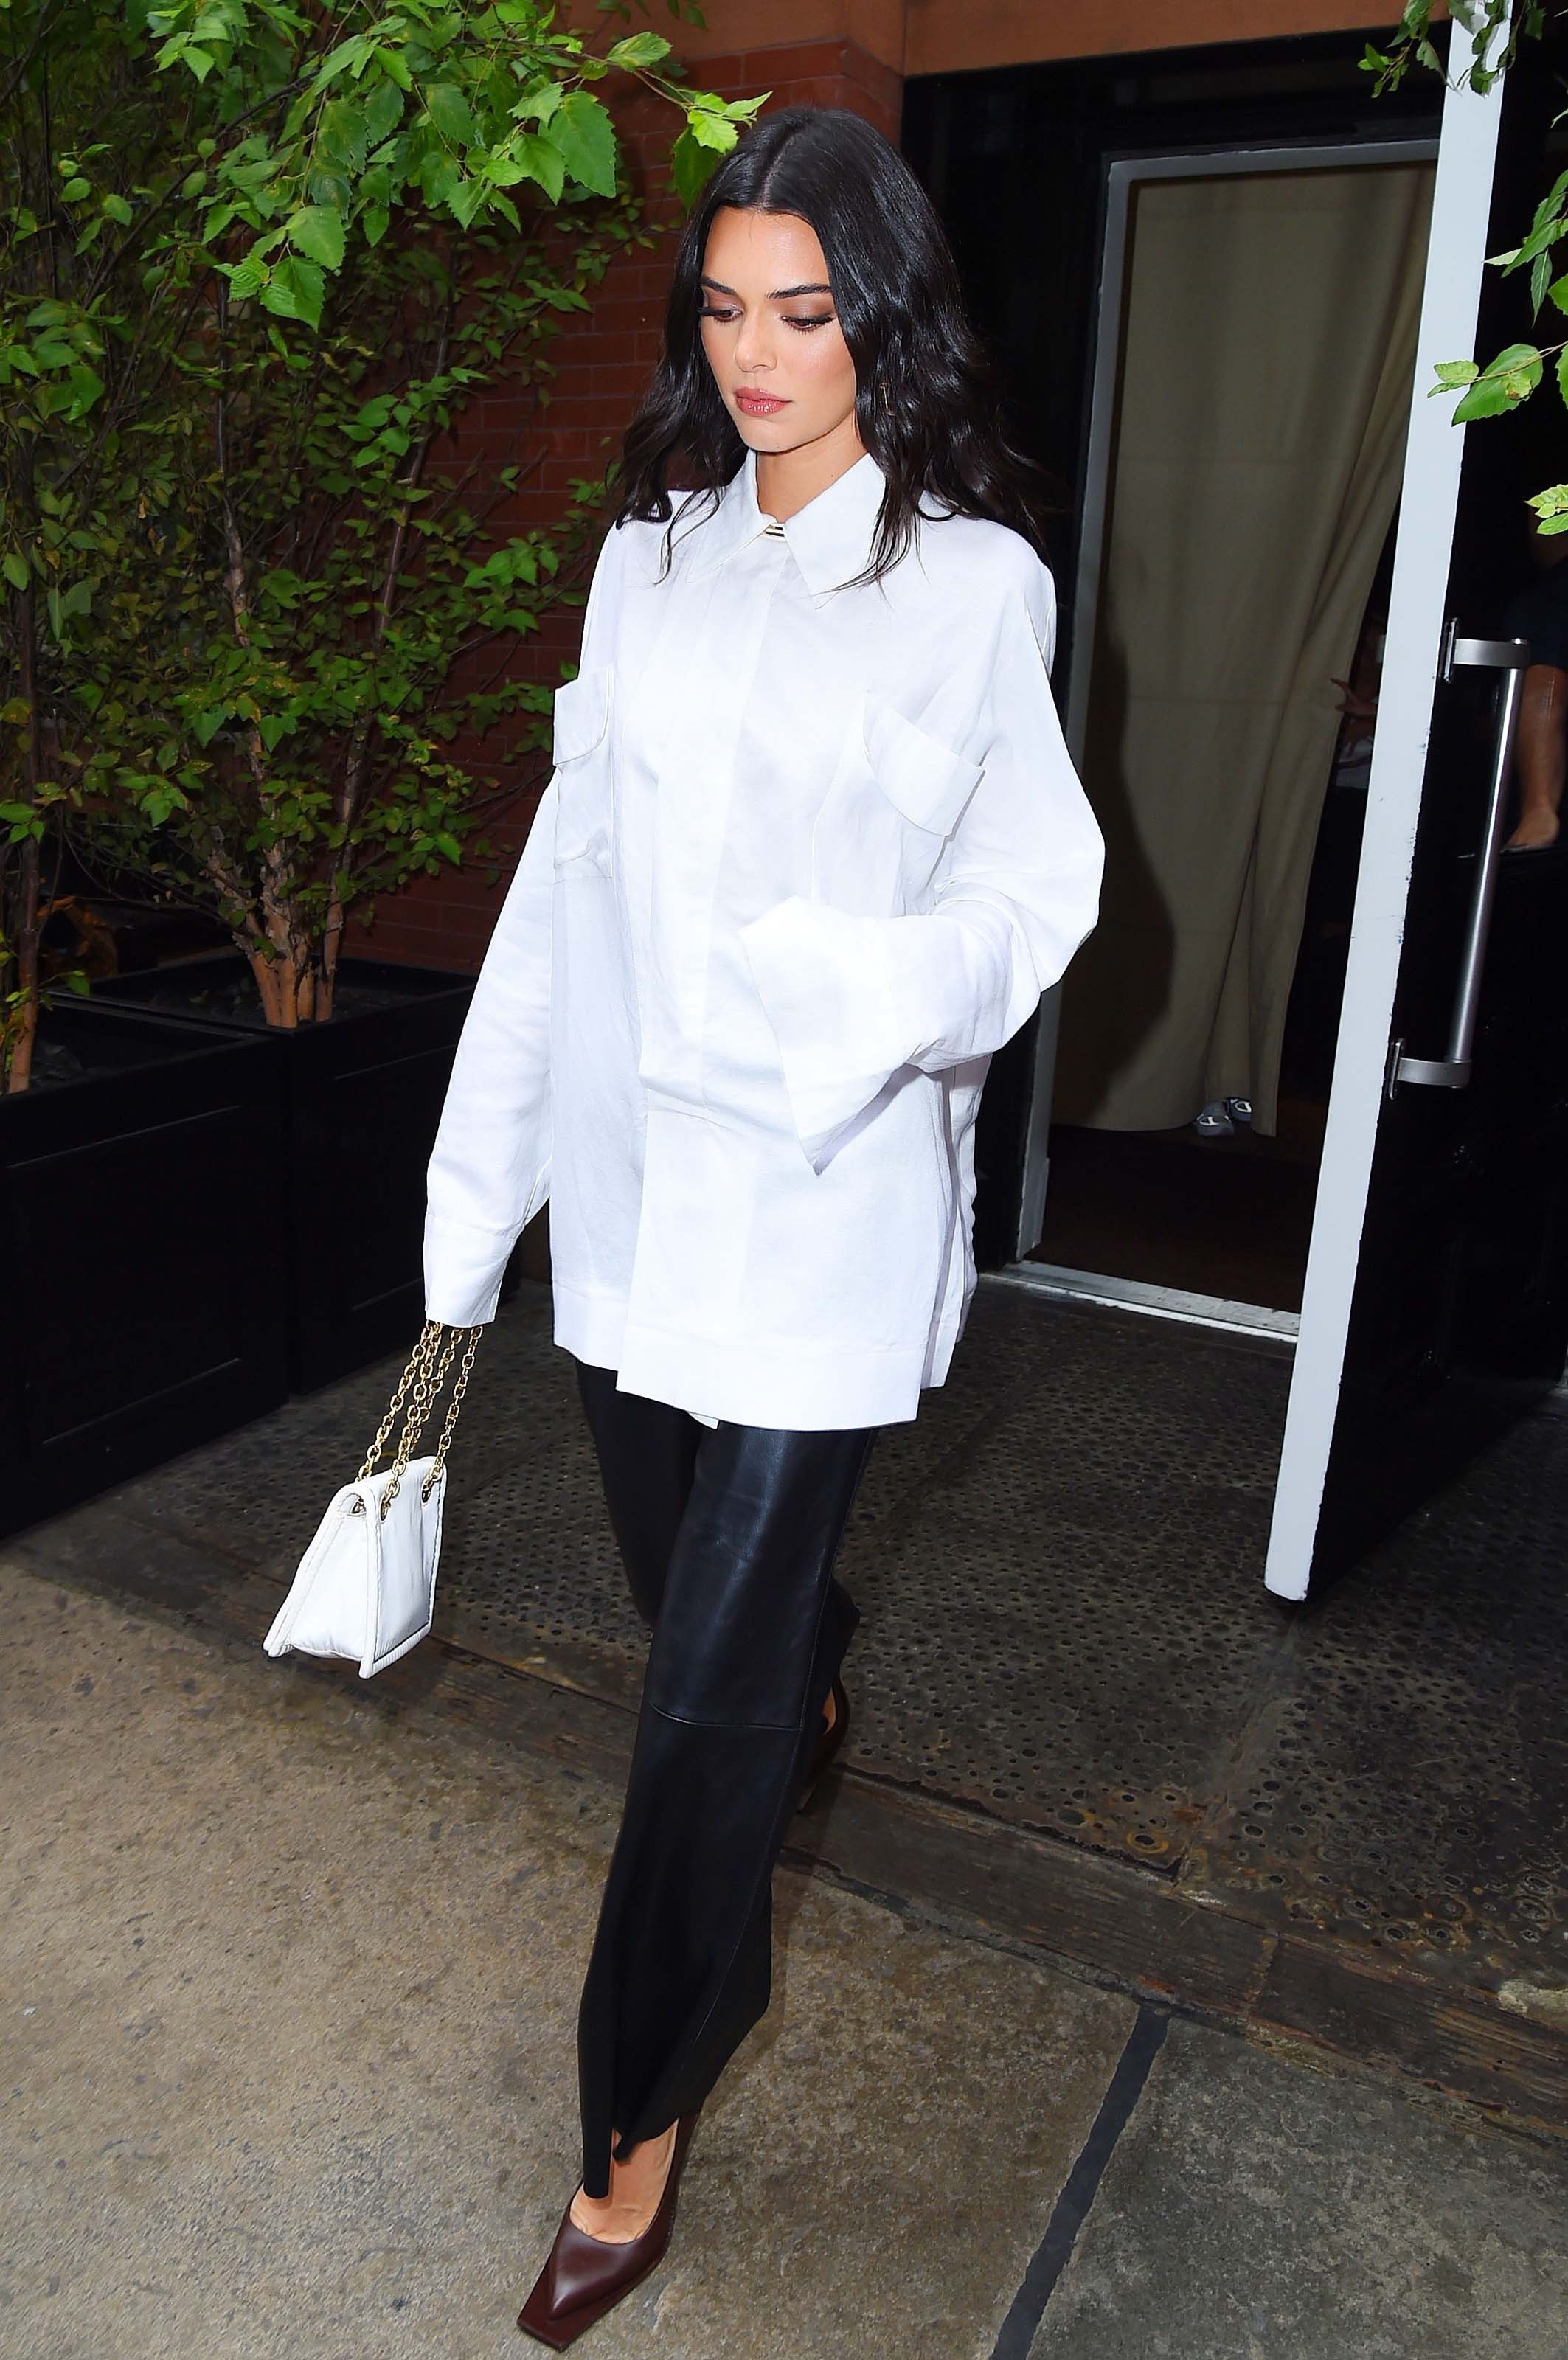 Kendall Jenner outside her hotel in NYC